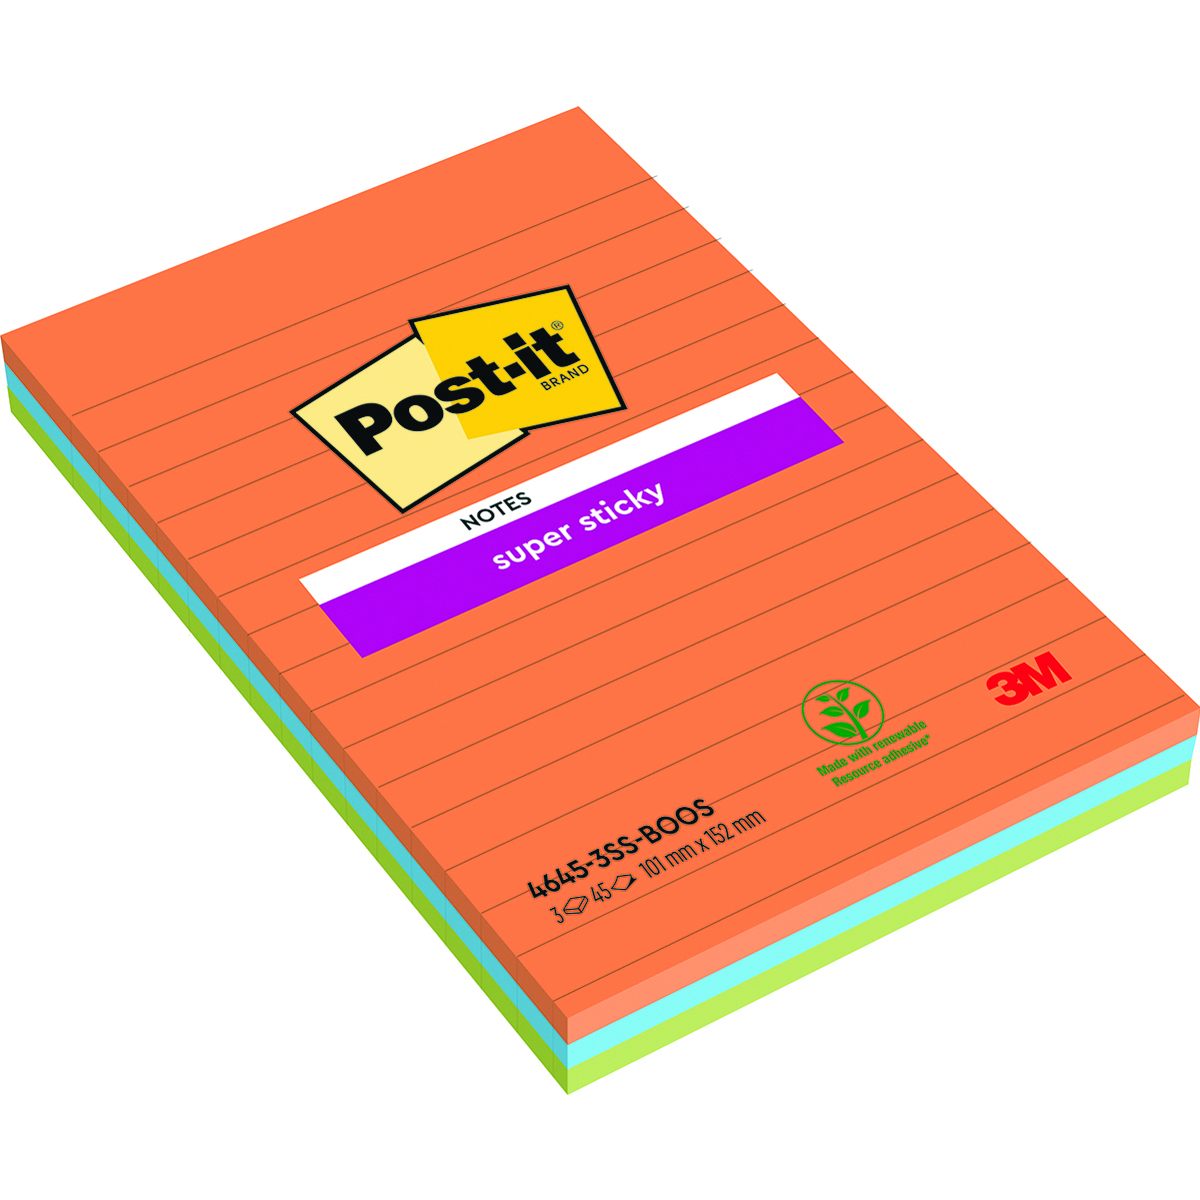 Post-it Super Sticky Big Note - 11x11 - Yellow - 30 sheets